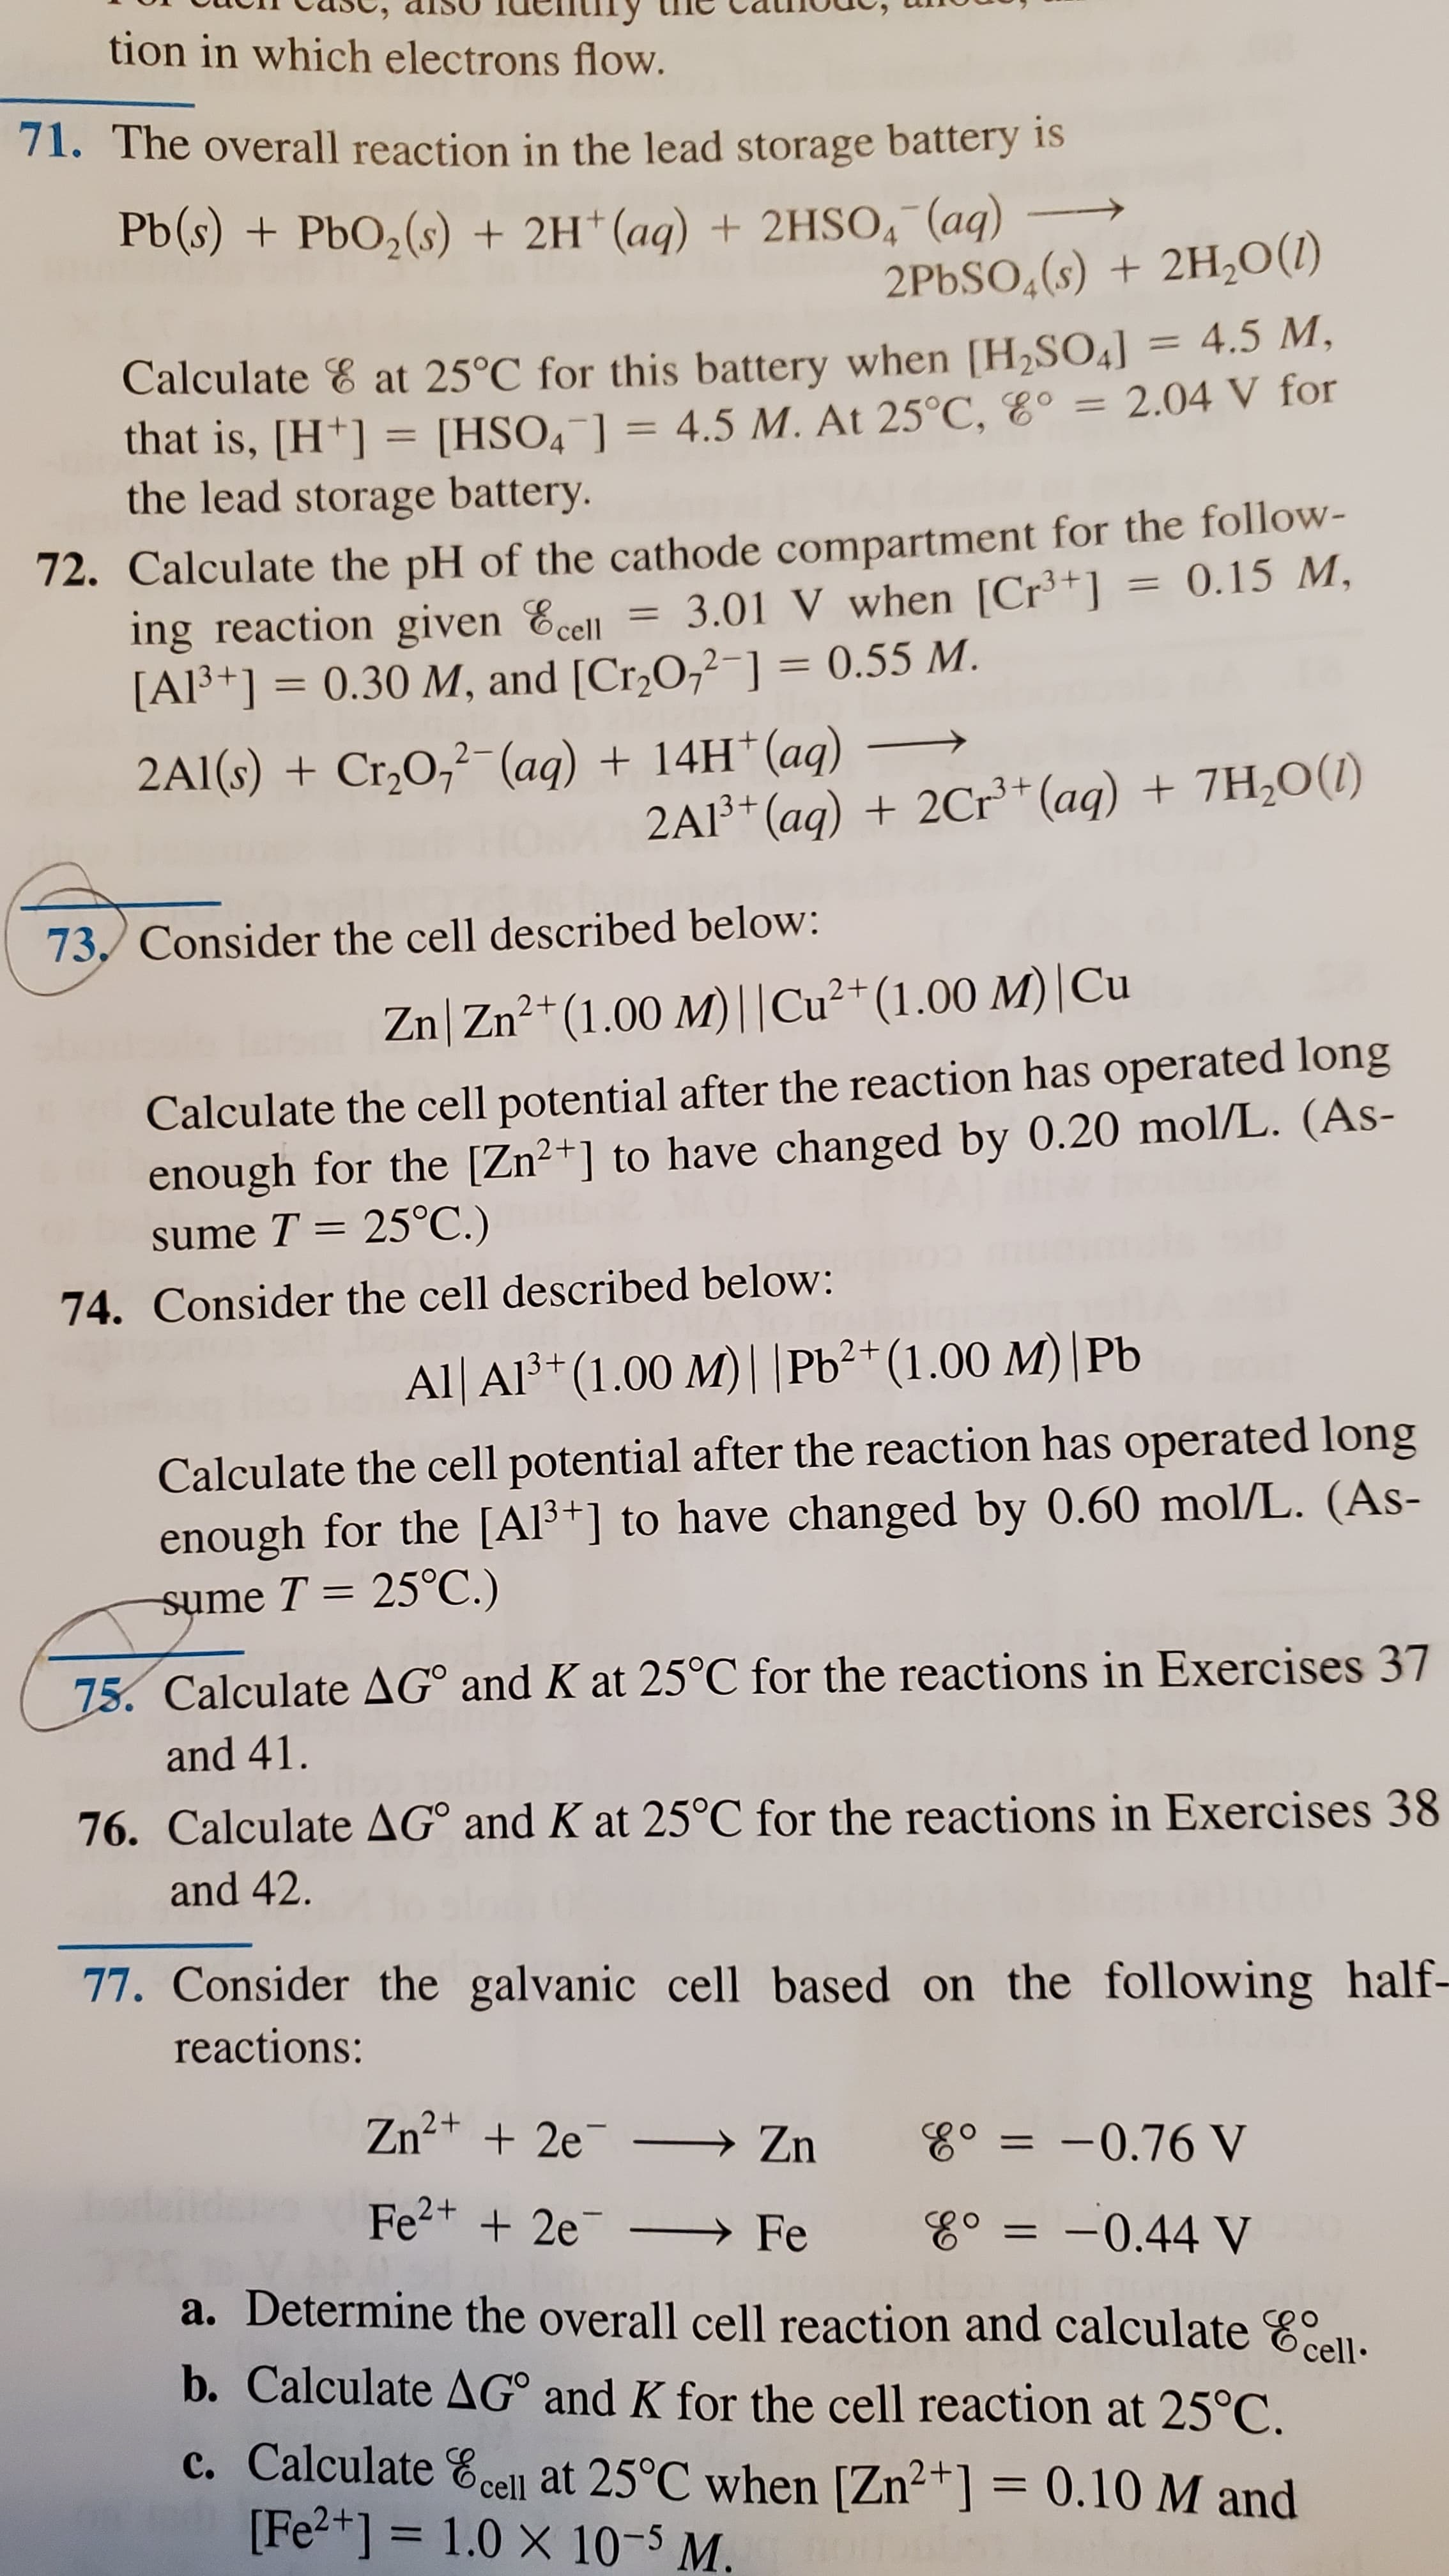 Calculate AG° and K at 25°C for the reactions in Exercises 37
and 41.
